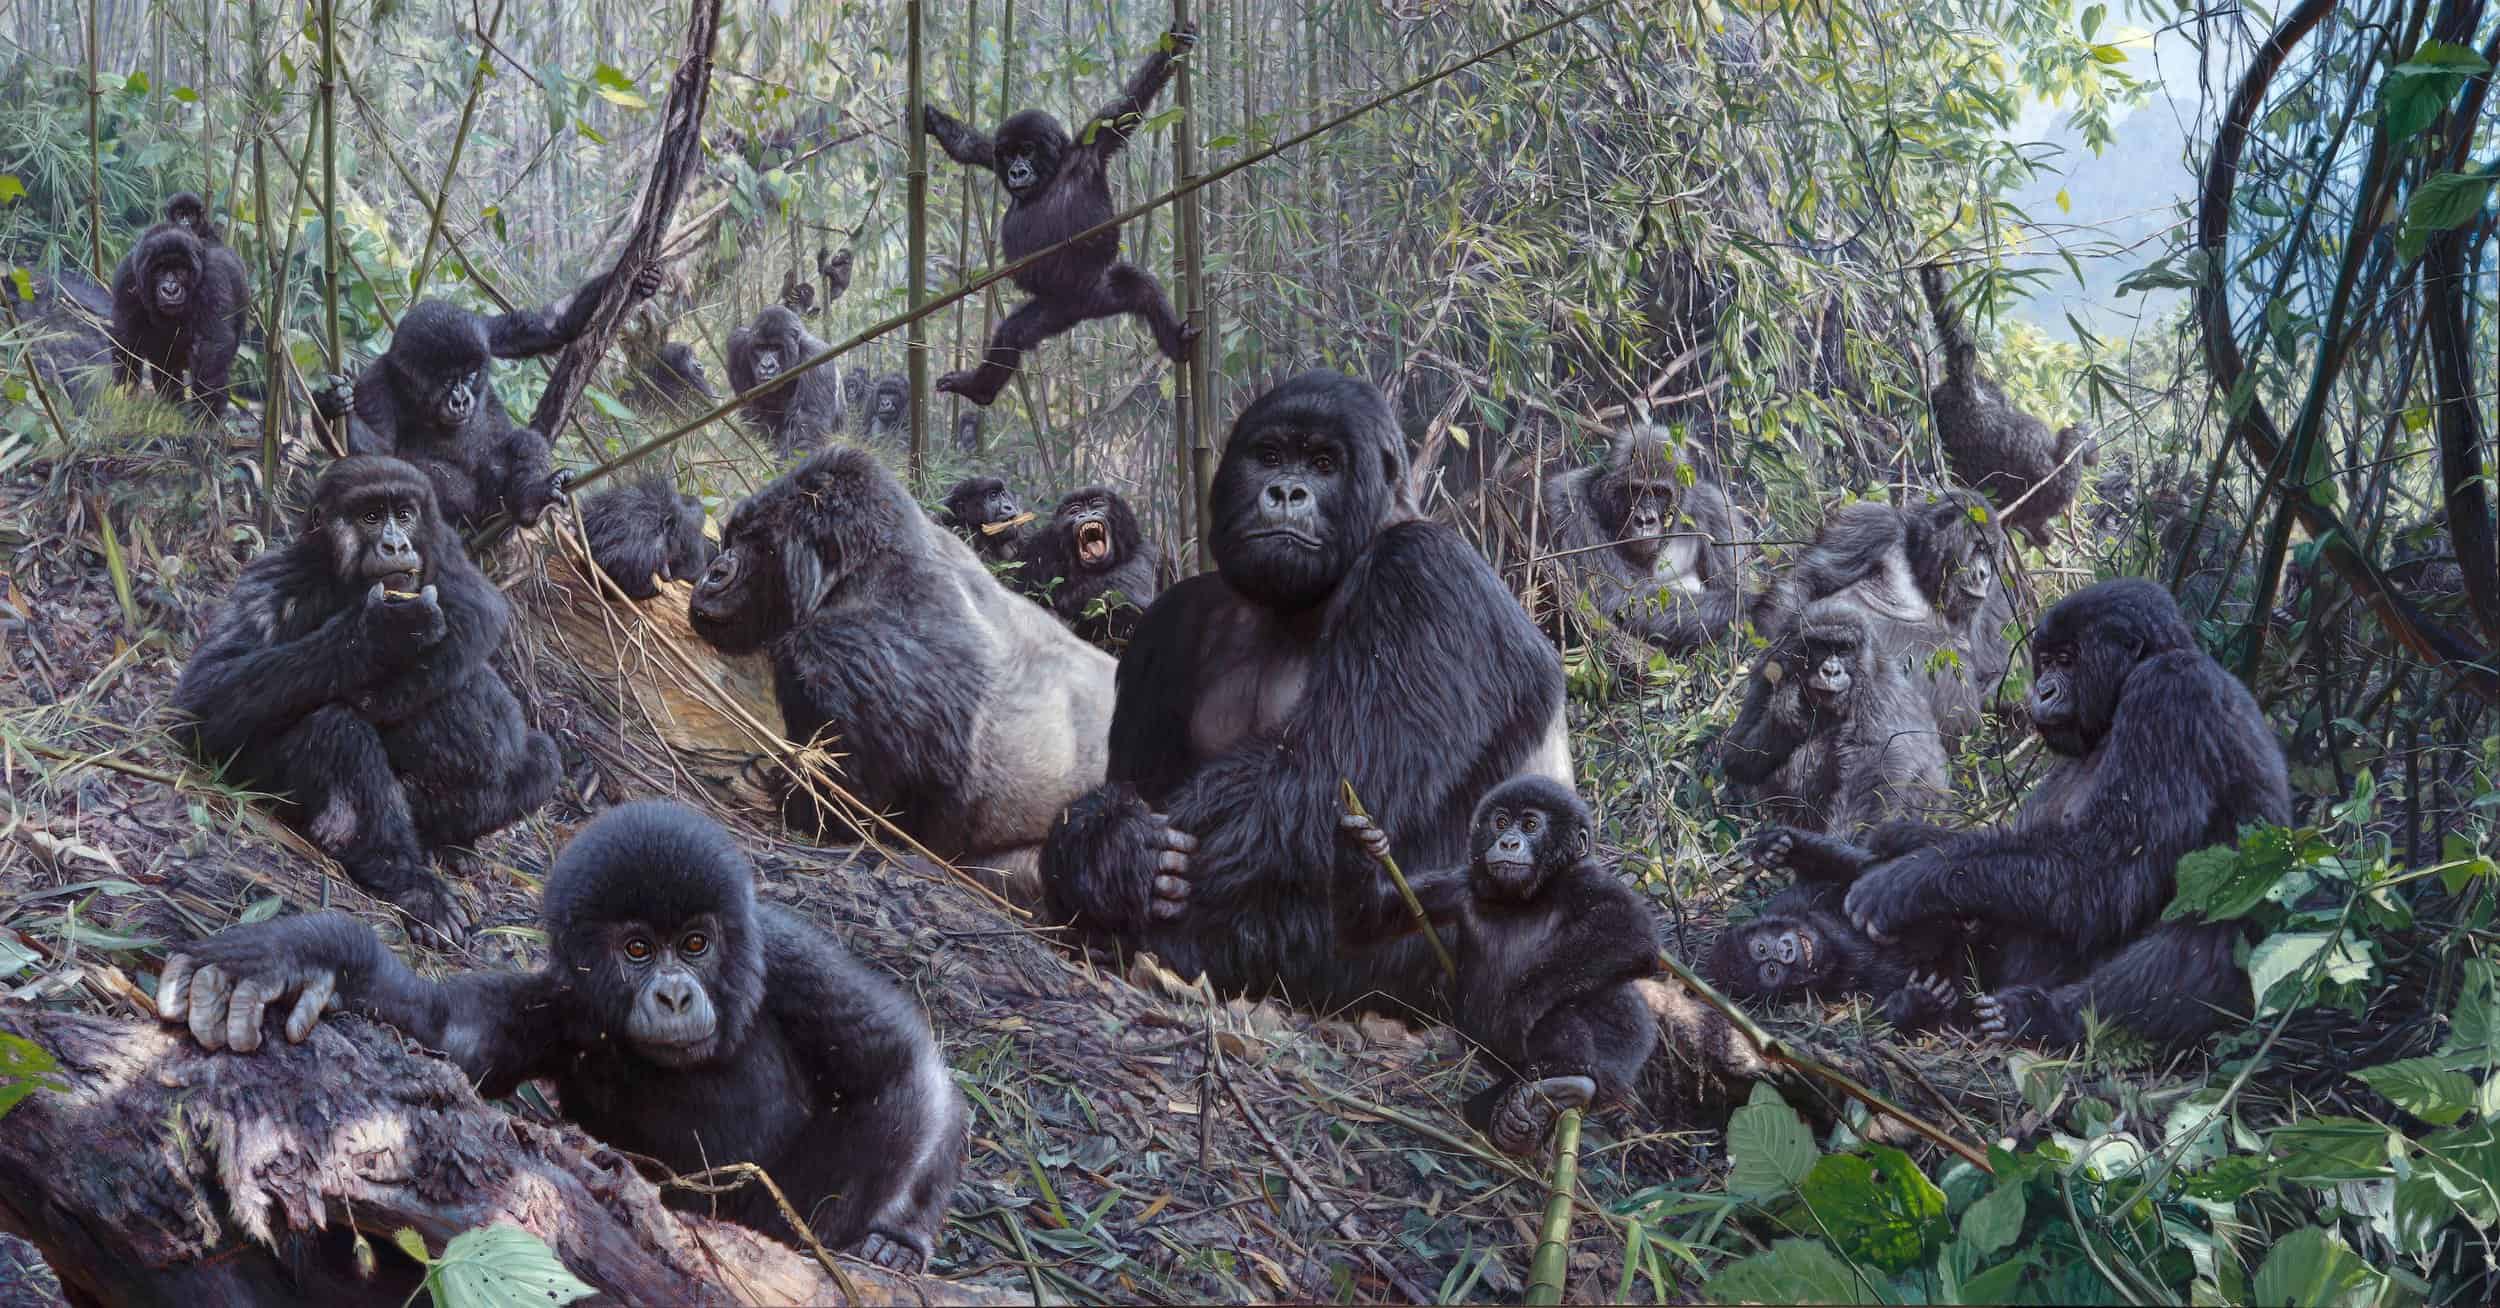 Painting by John Banovich of gorillas living together in jungle